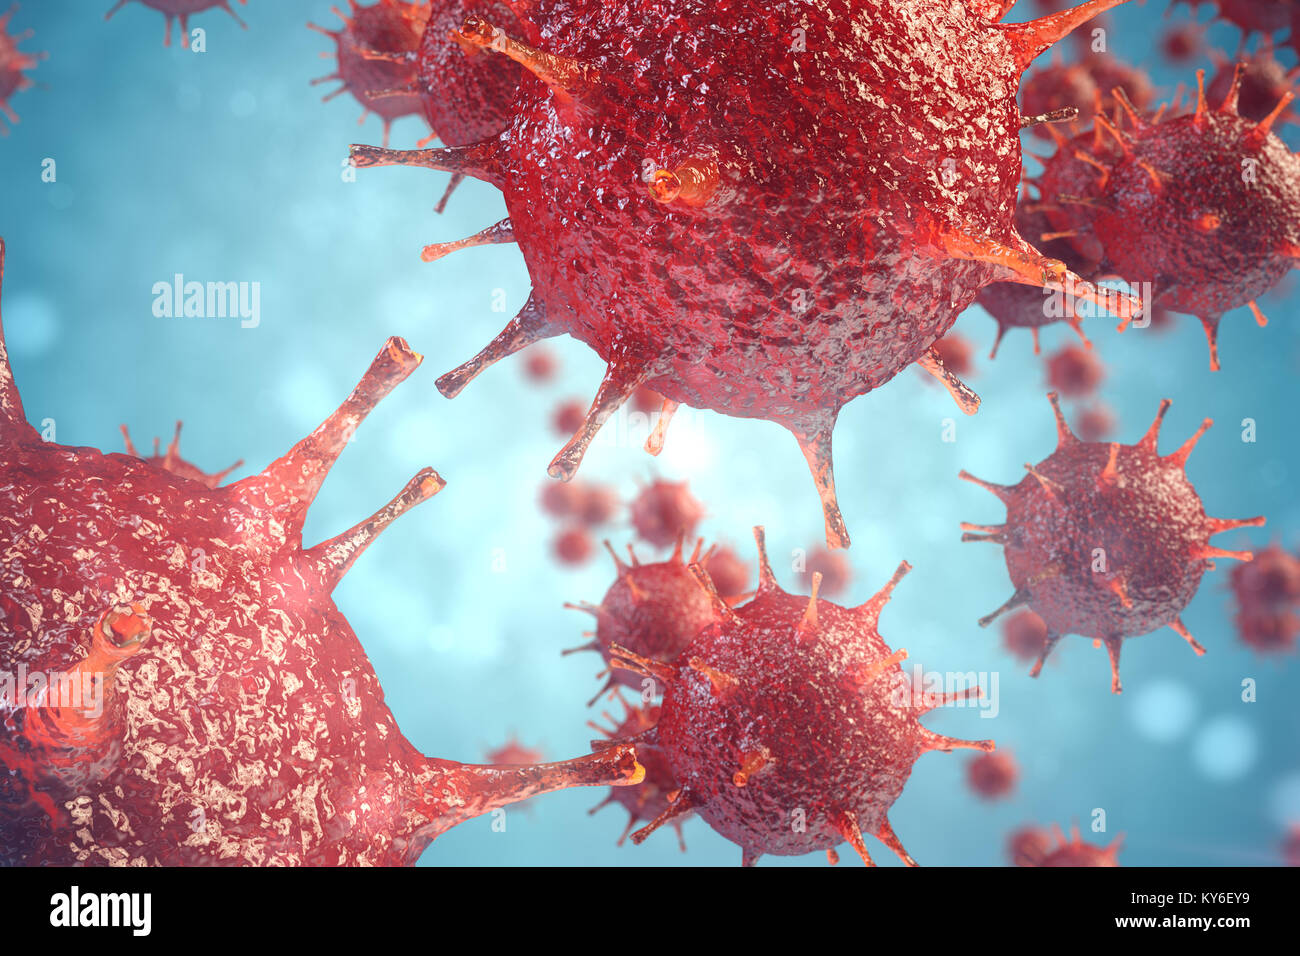 3d illustration pathogenic viruses causing infection in host organism, Viral disease outbreak, virus abstract background. Stock Photo